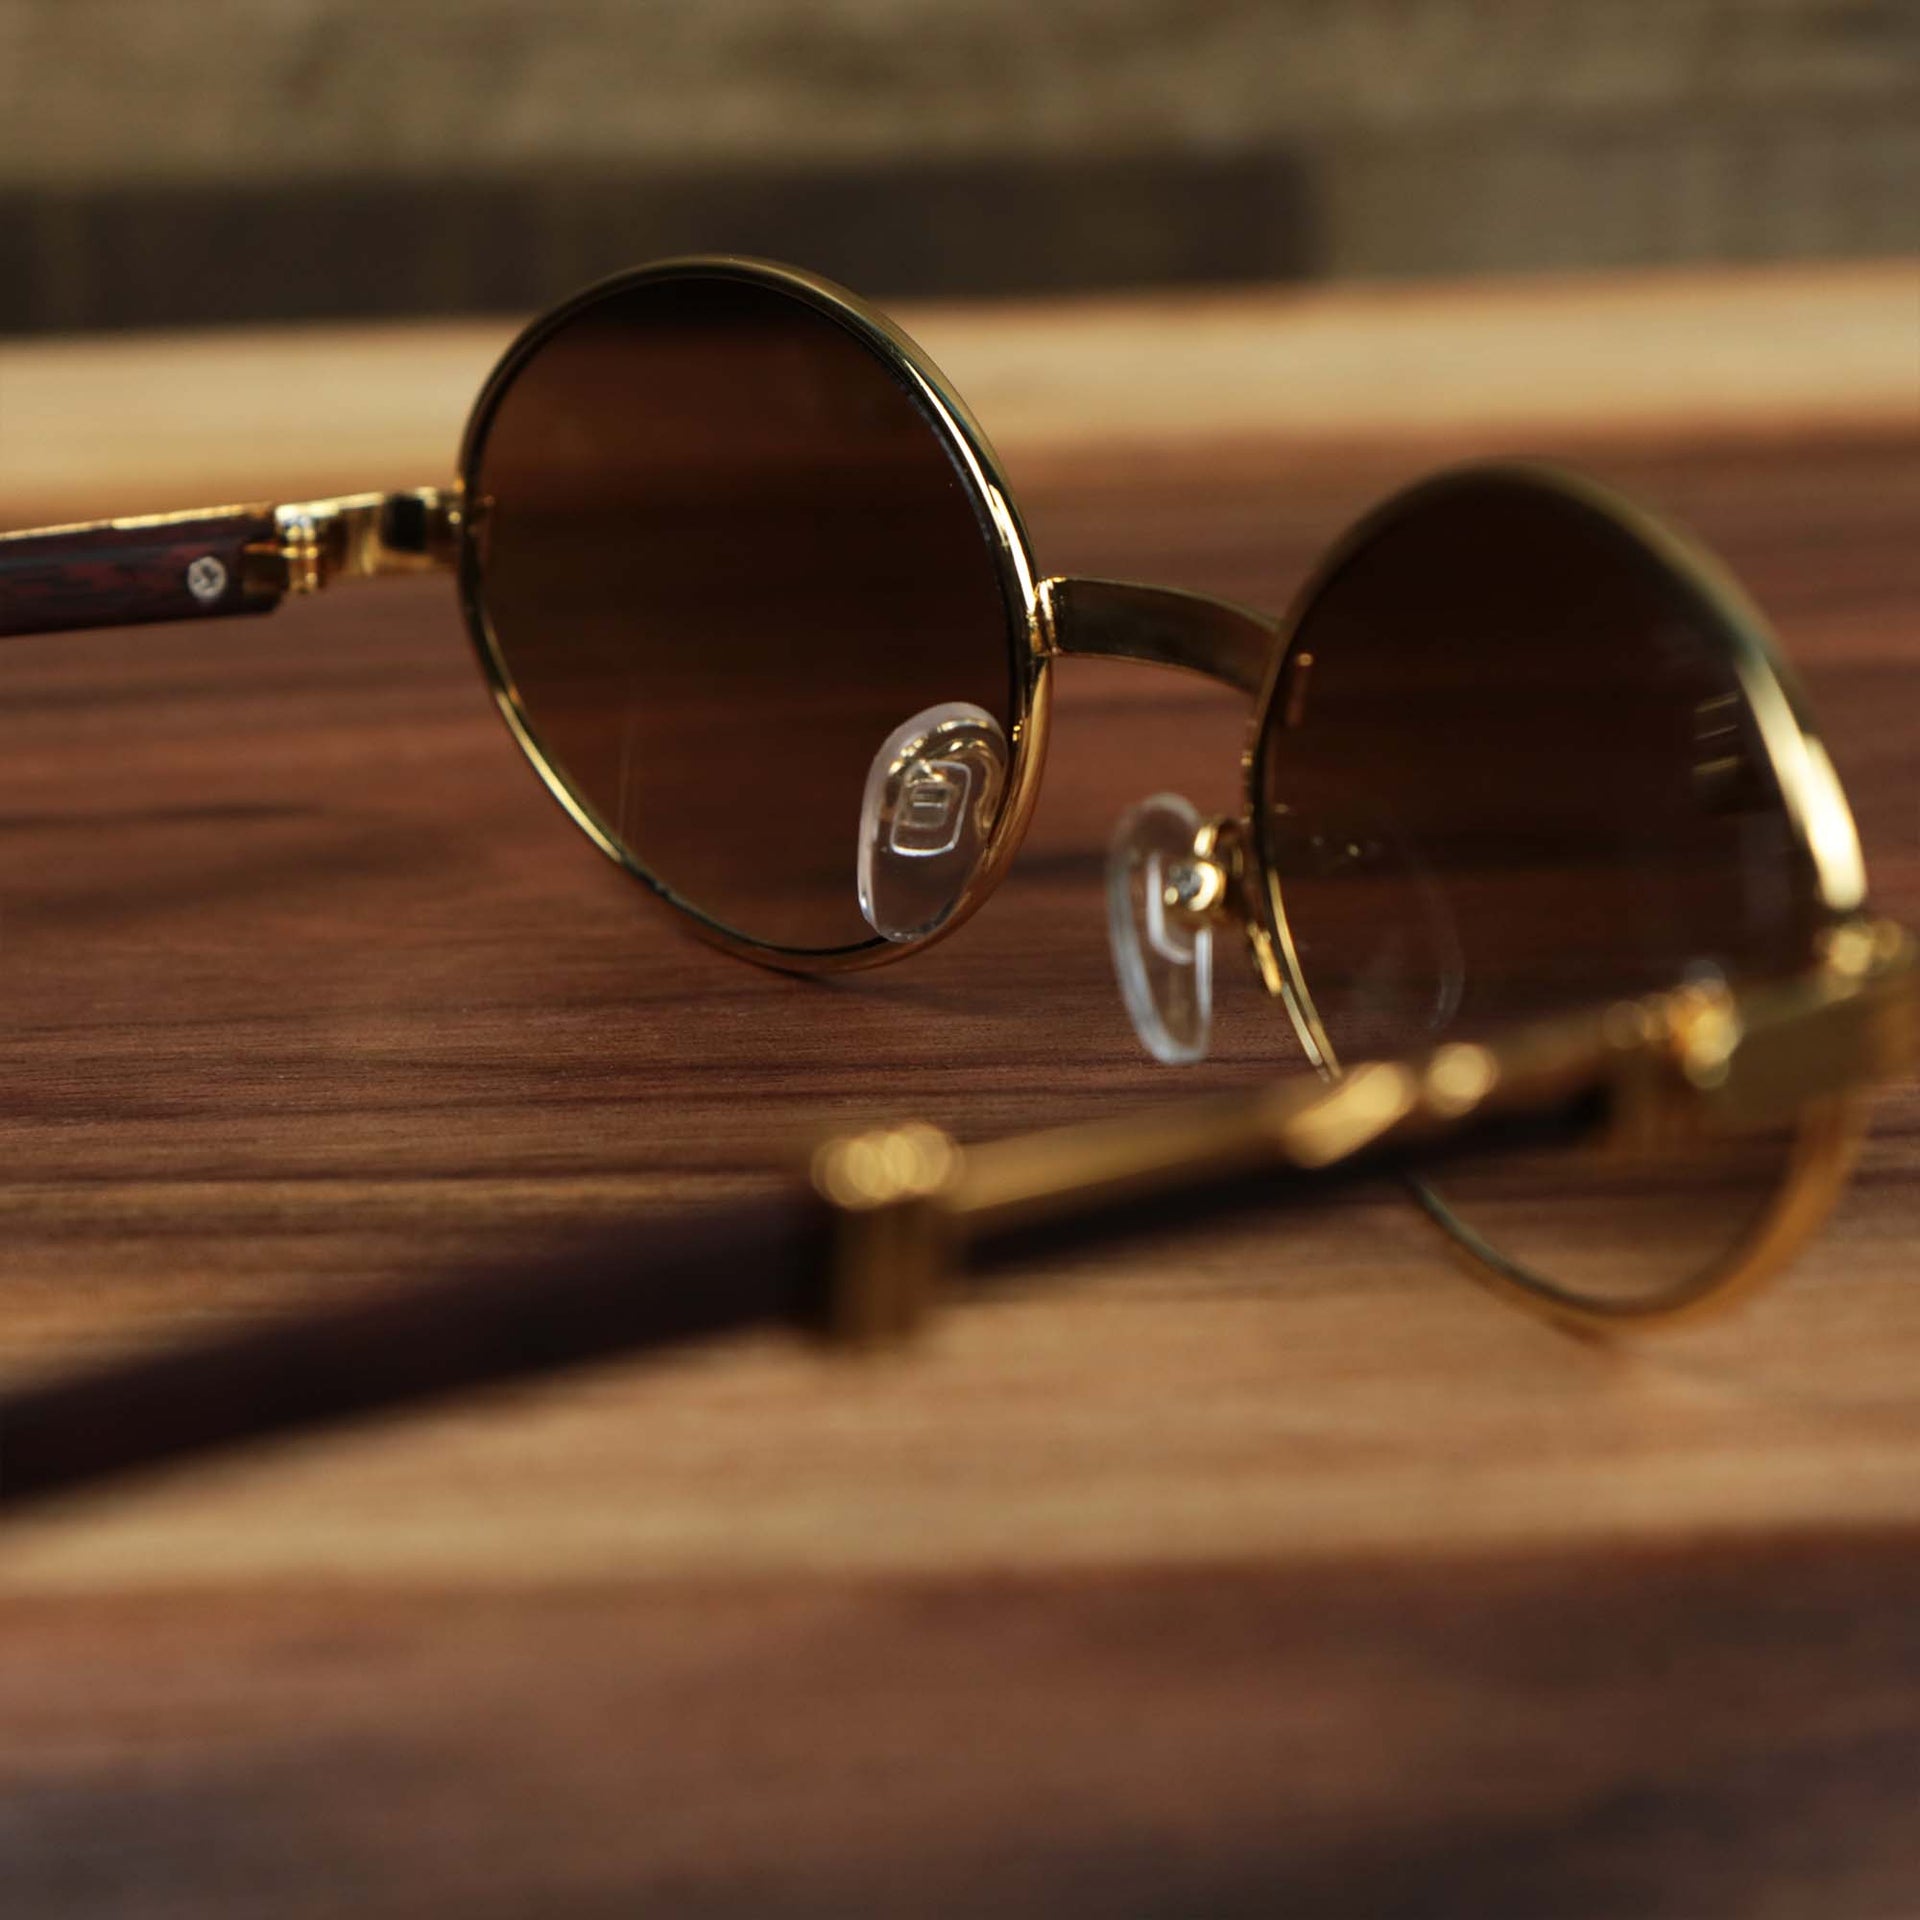 The inside of the Oval 3 Row Frame Black Gradient Lens Sunglasses with Gold Frame